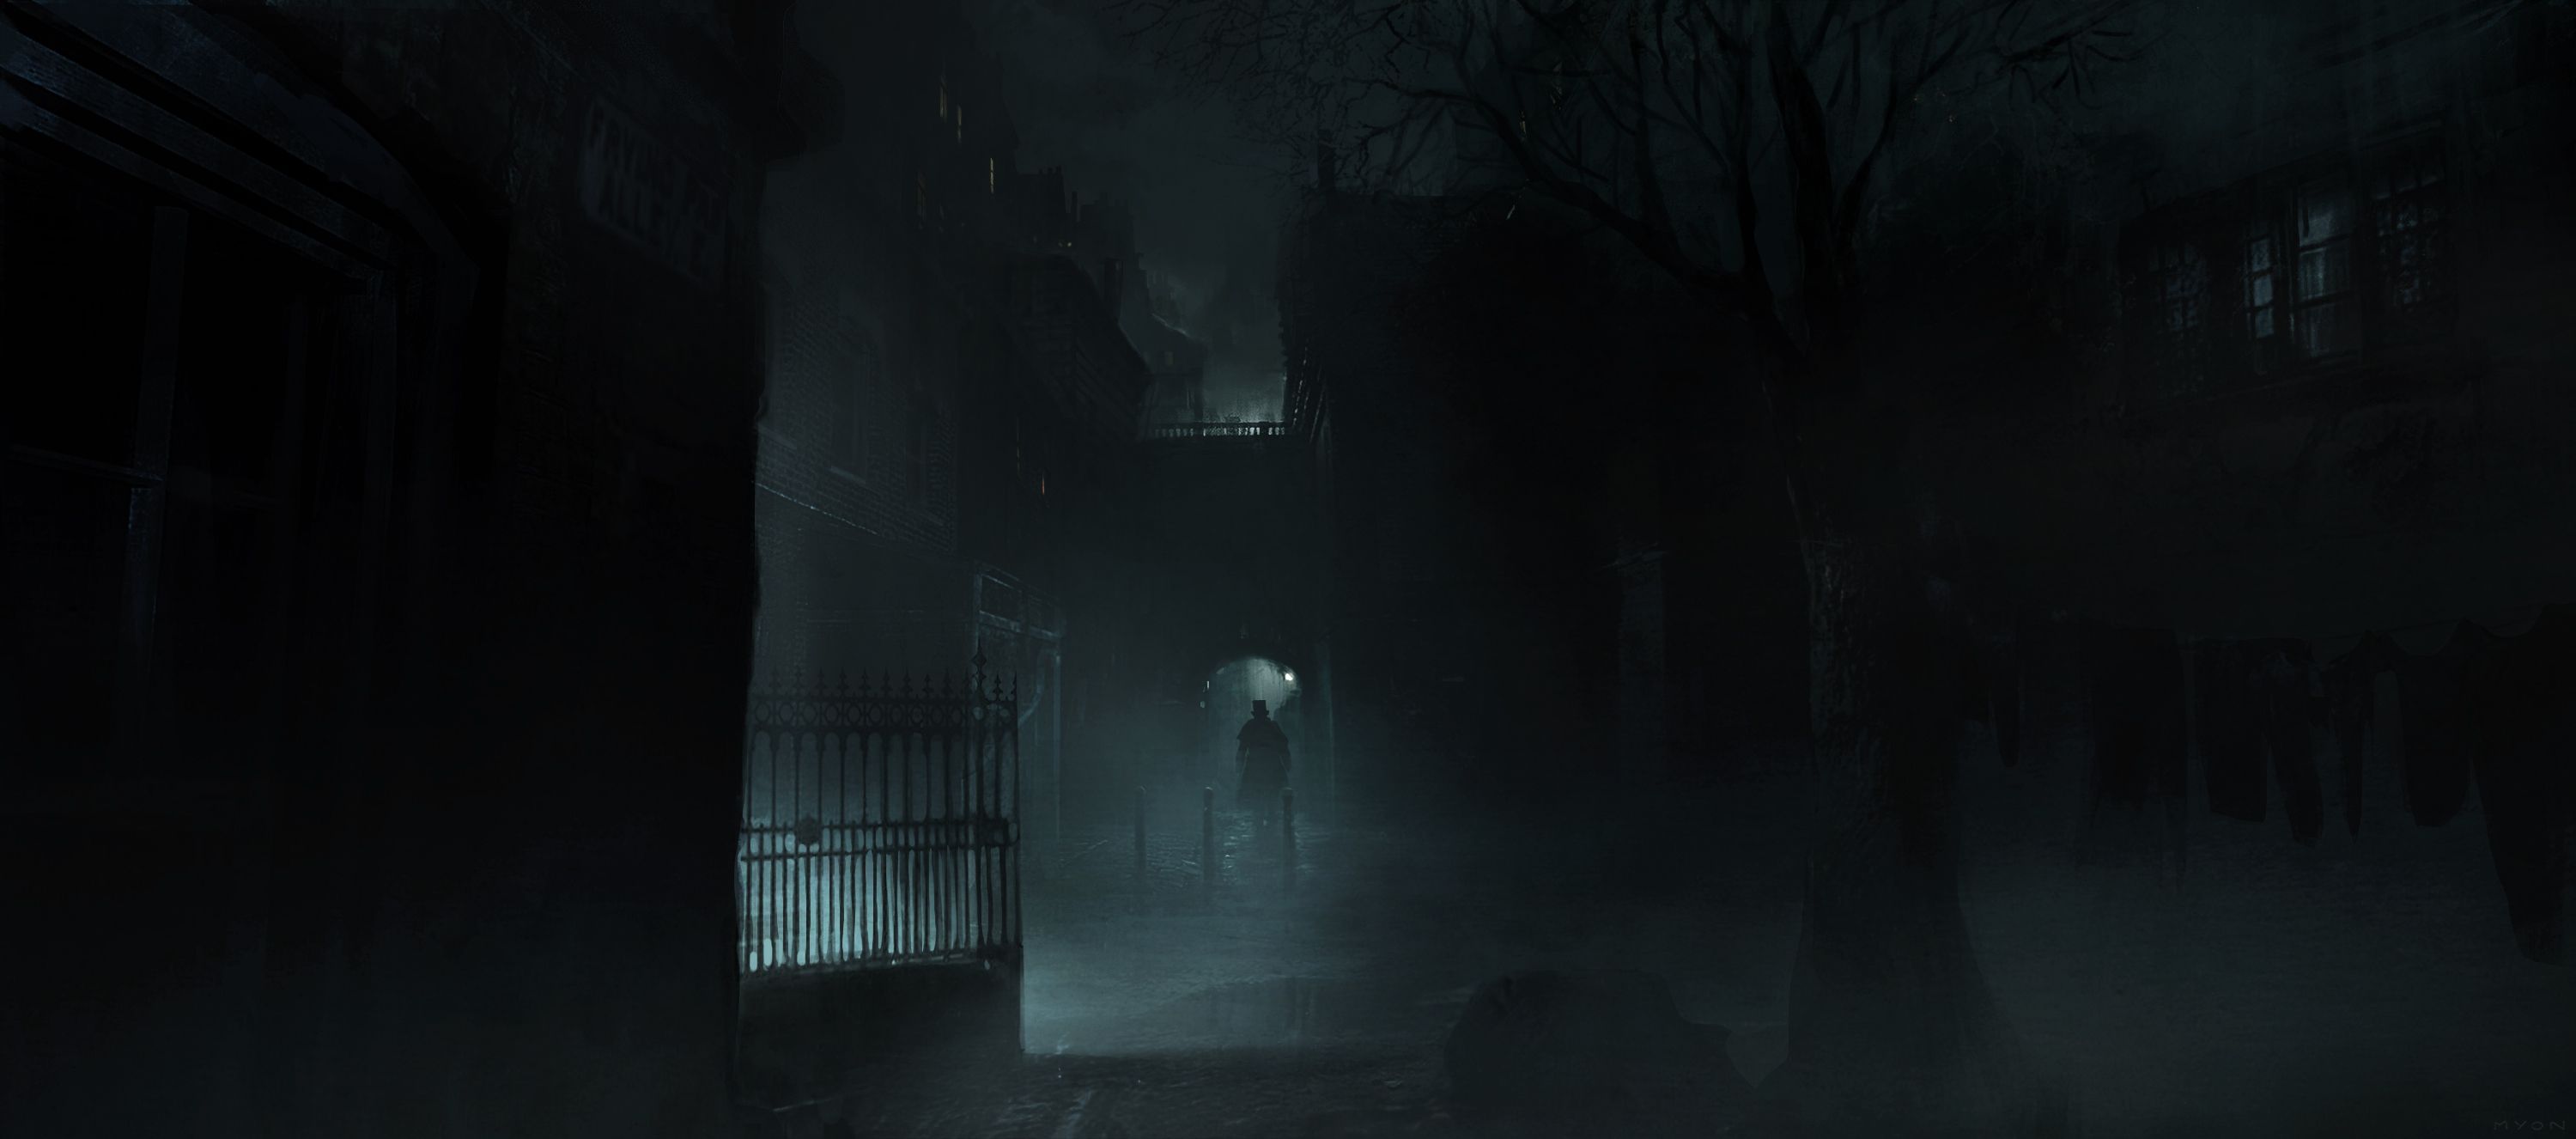 Jack The Ripper Wallpapers Wallpaper Cave